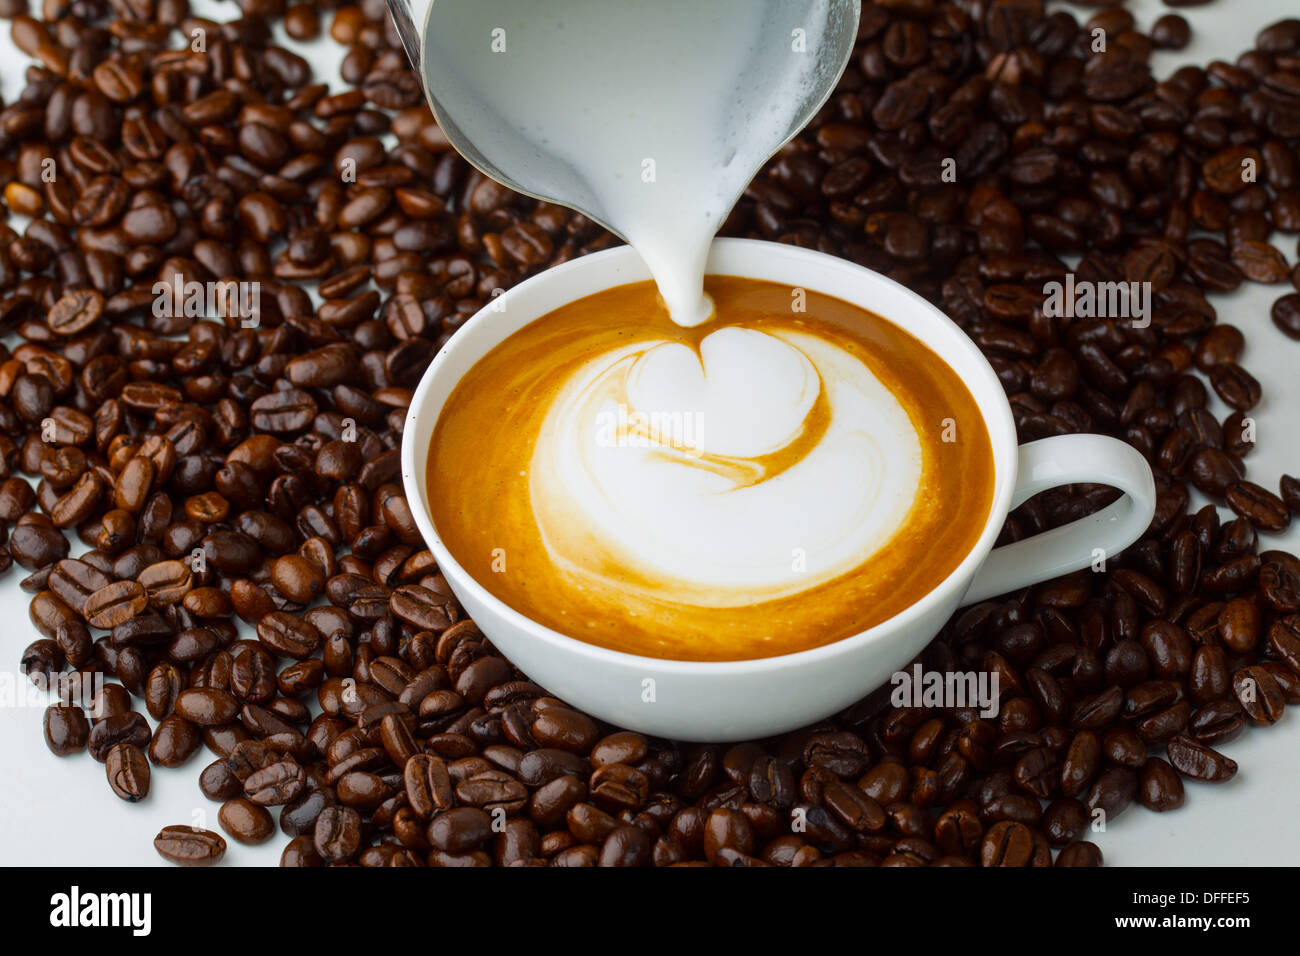 Latte art, coffee in coffee beans background Stock Photo